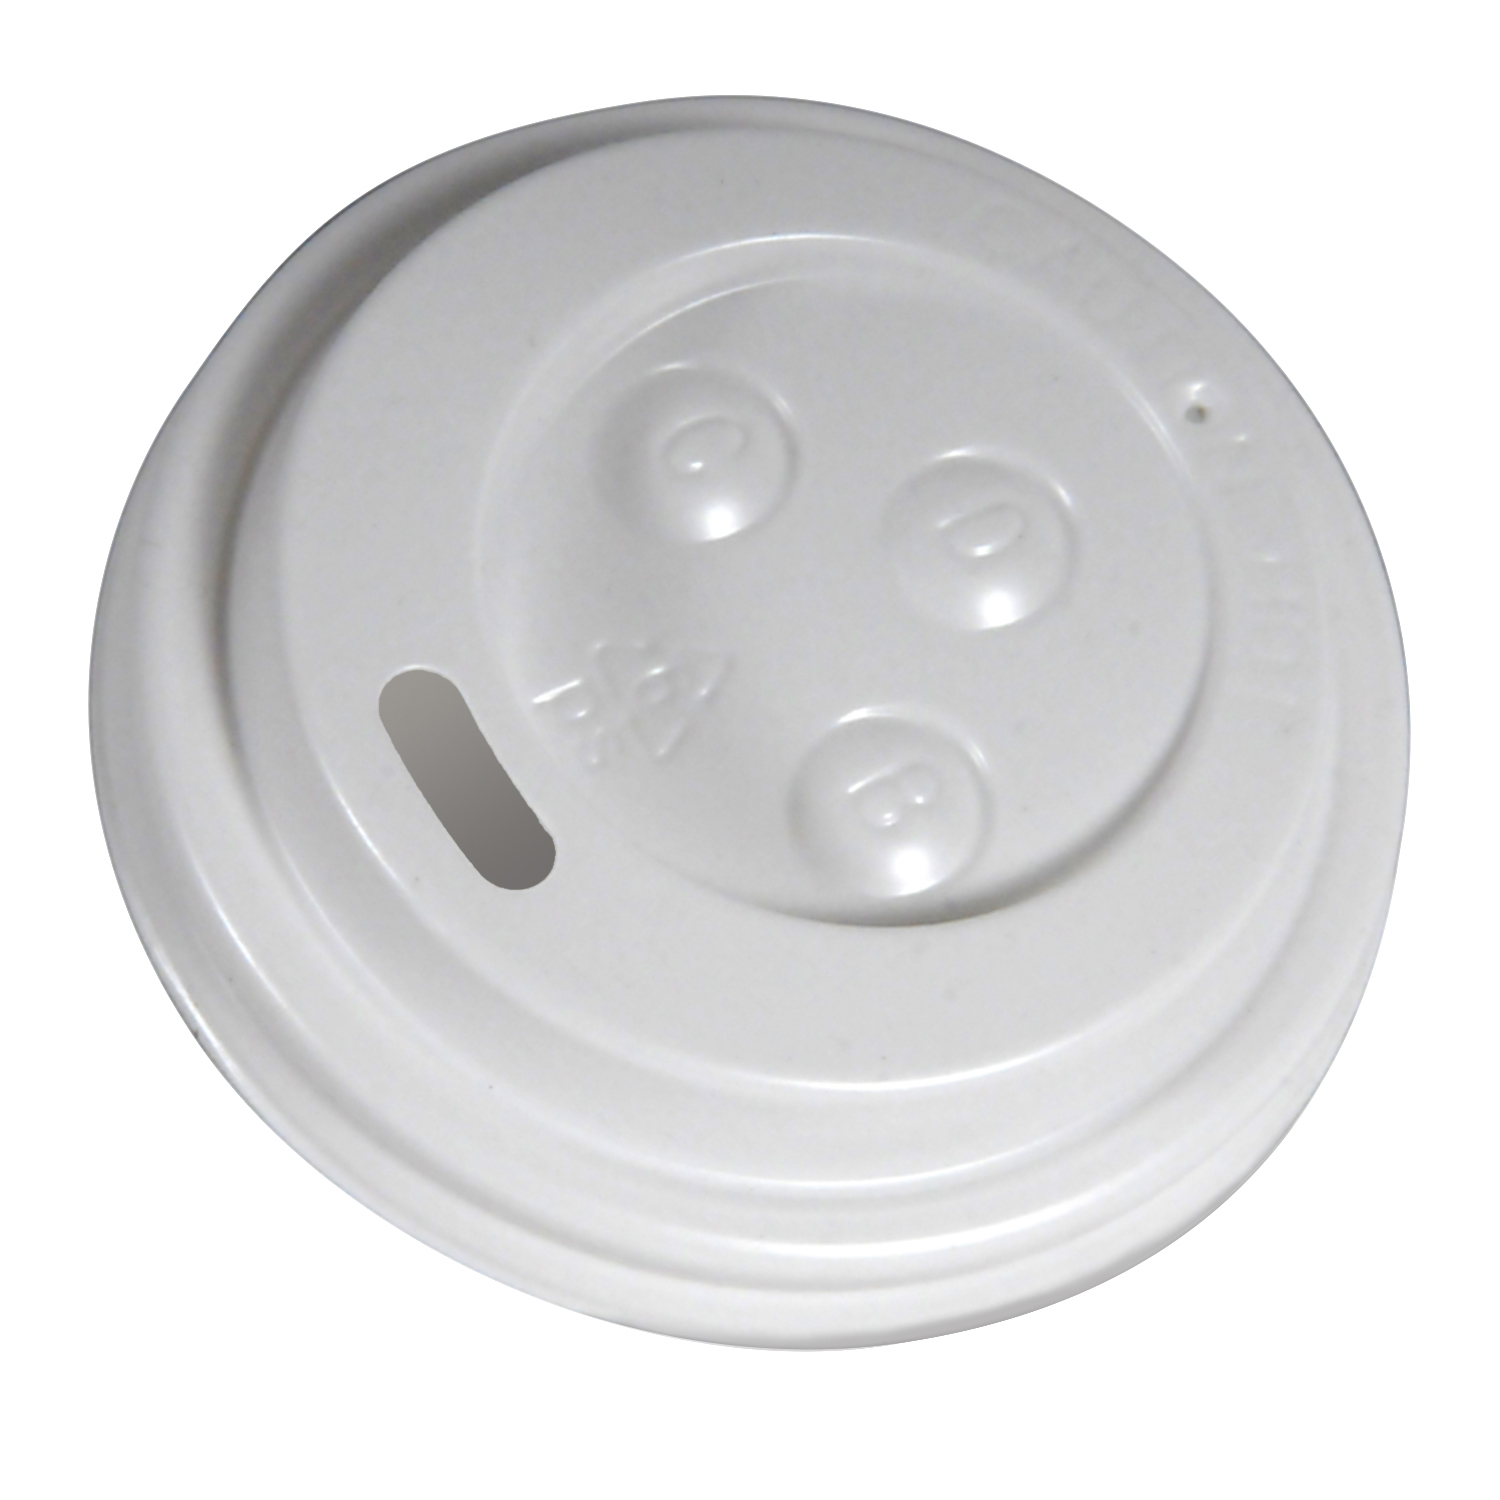 90mm White Dome Hot Cup Latch Lid